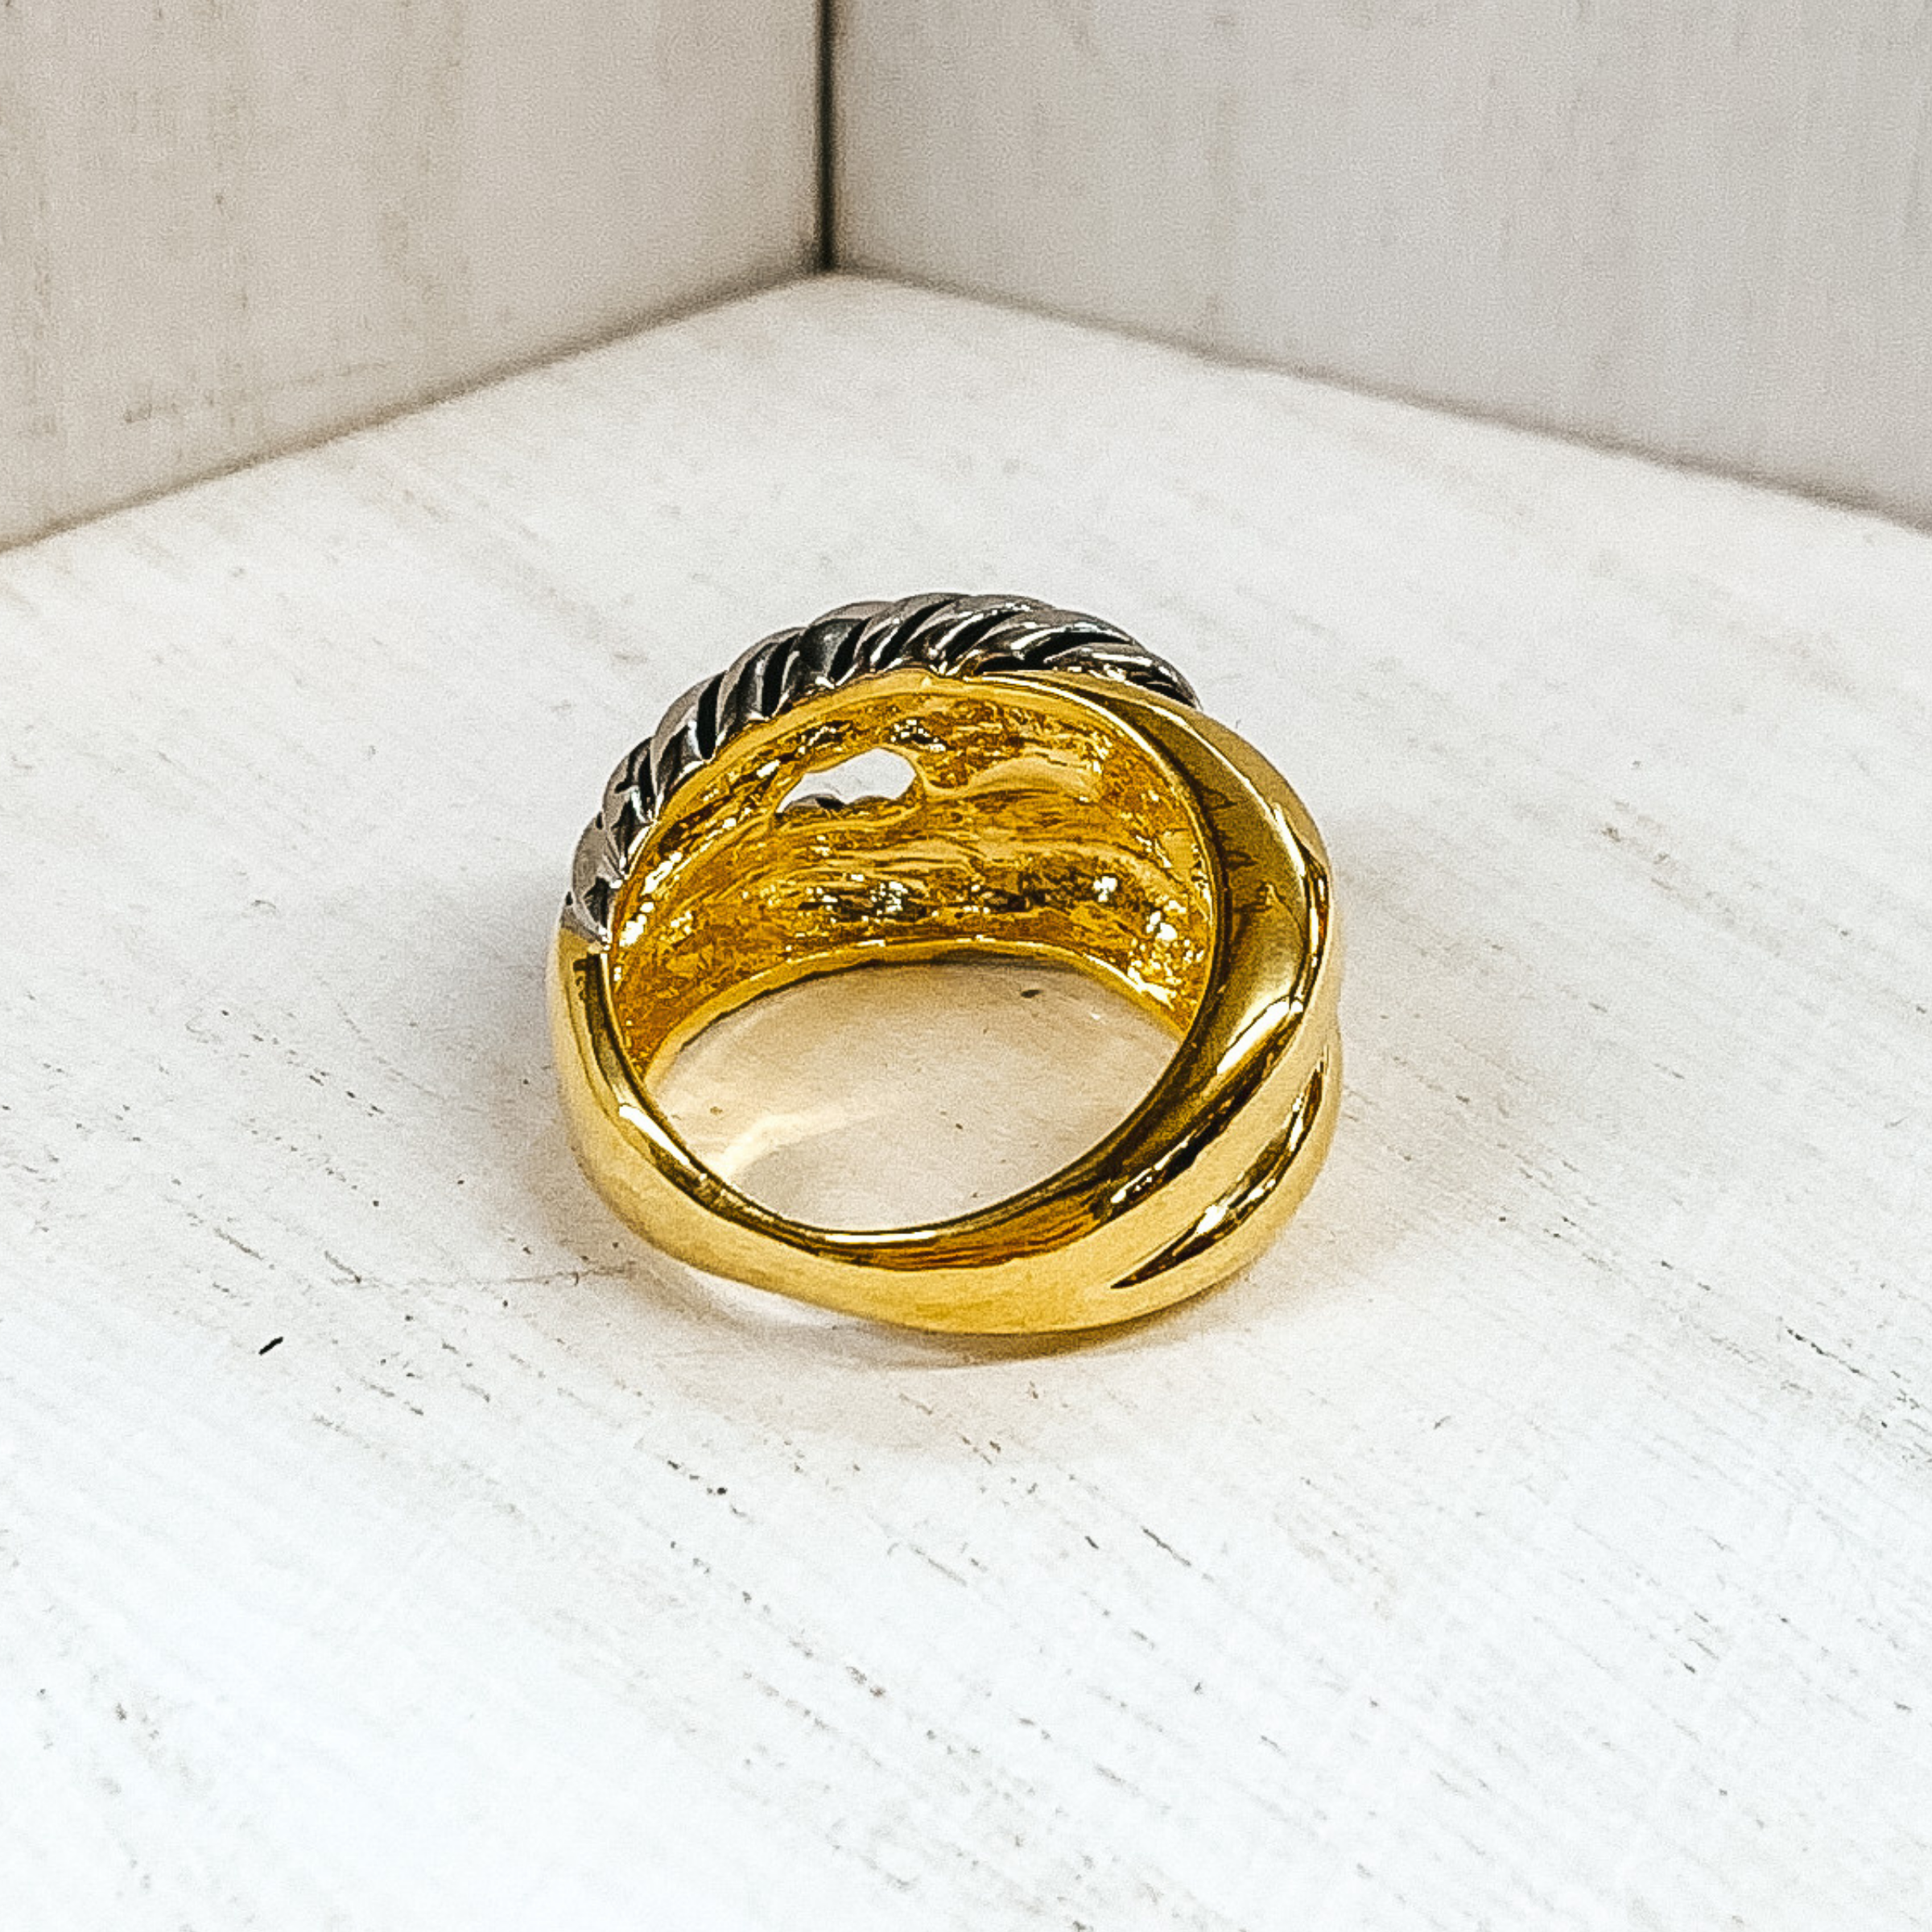 Two Toned Knot Ring in Gold/Silver Tone - Giddy Up Glamour Boutique